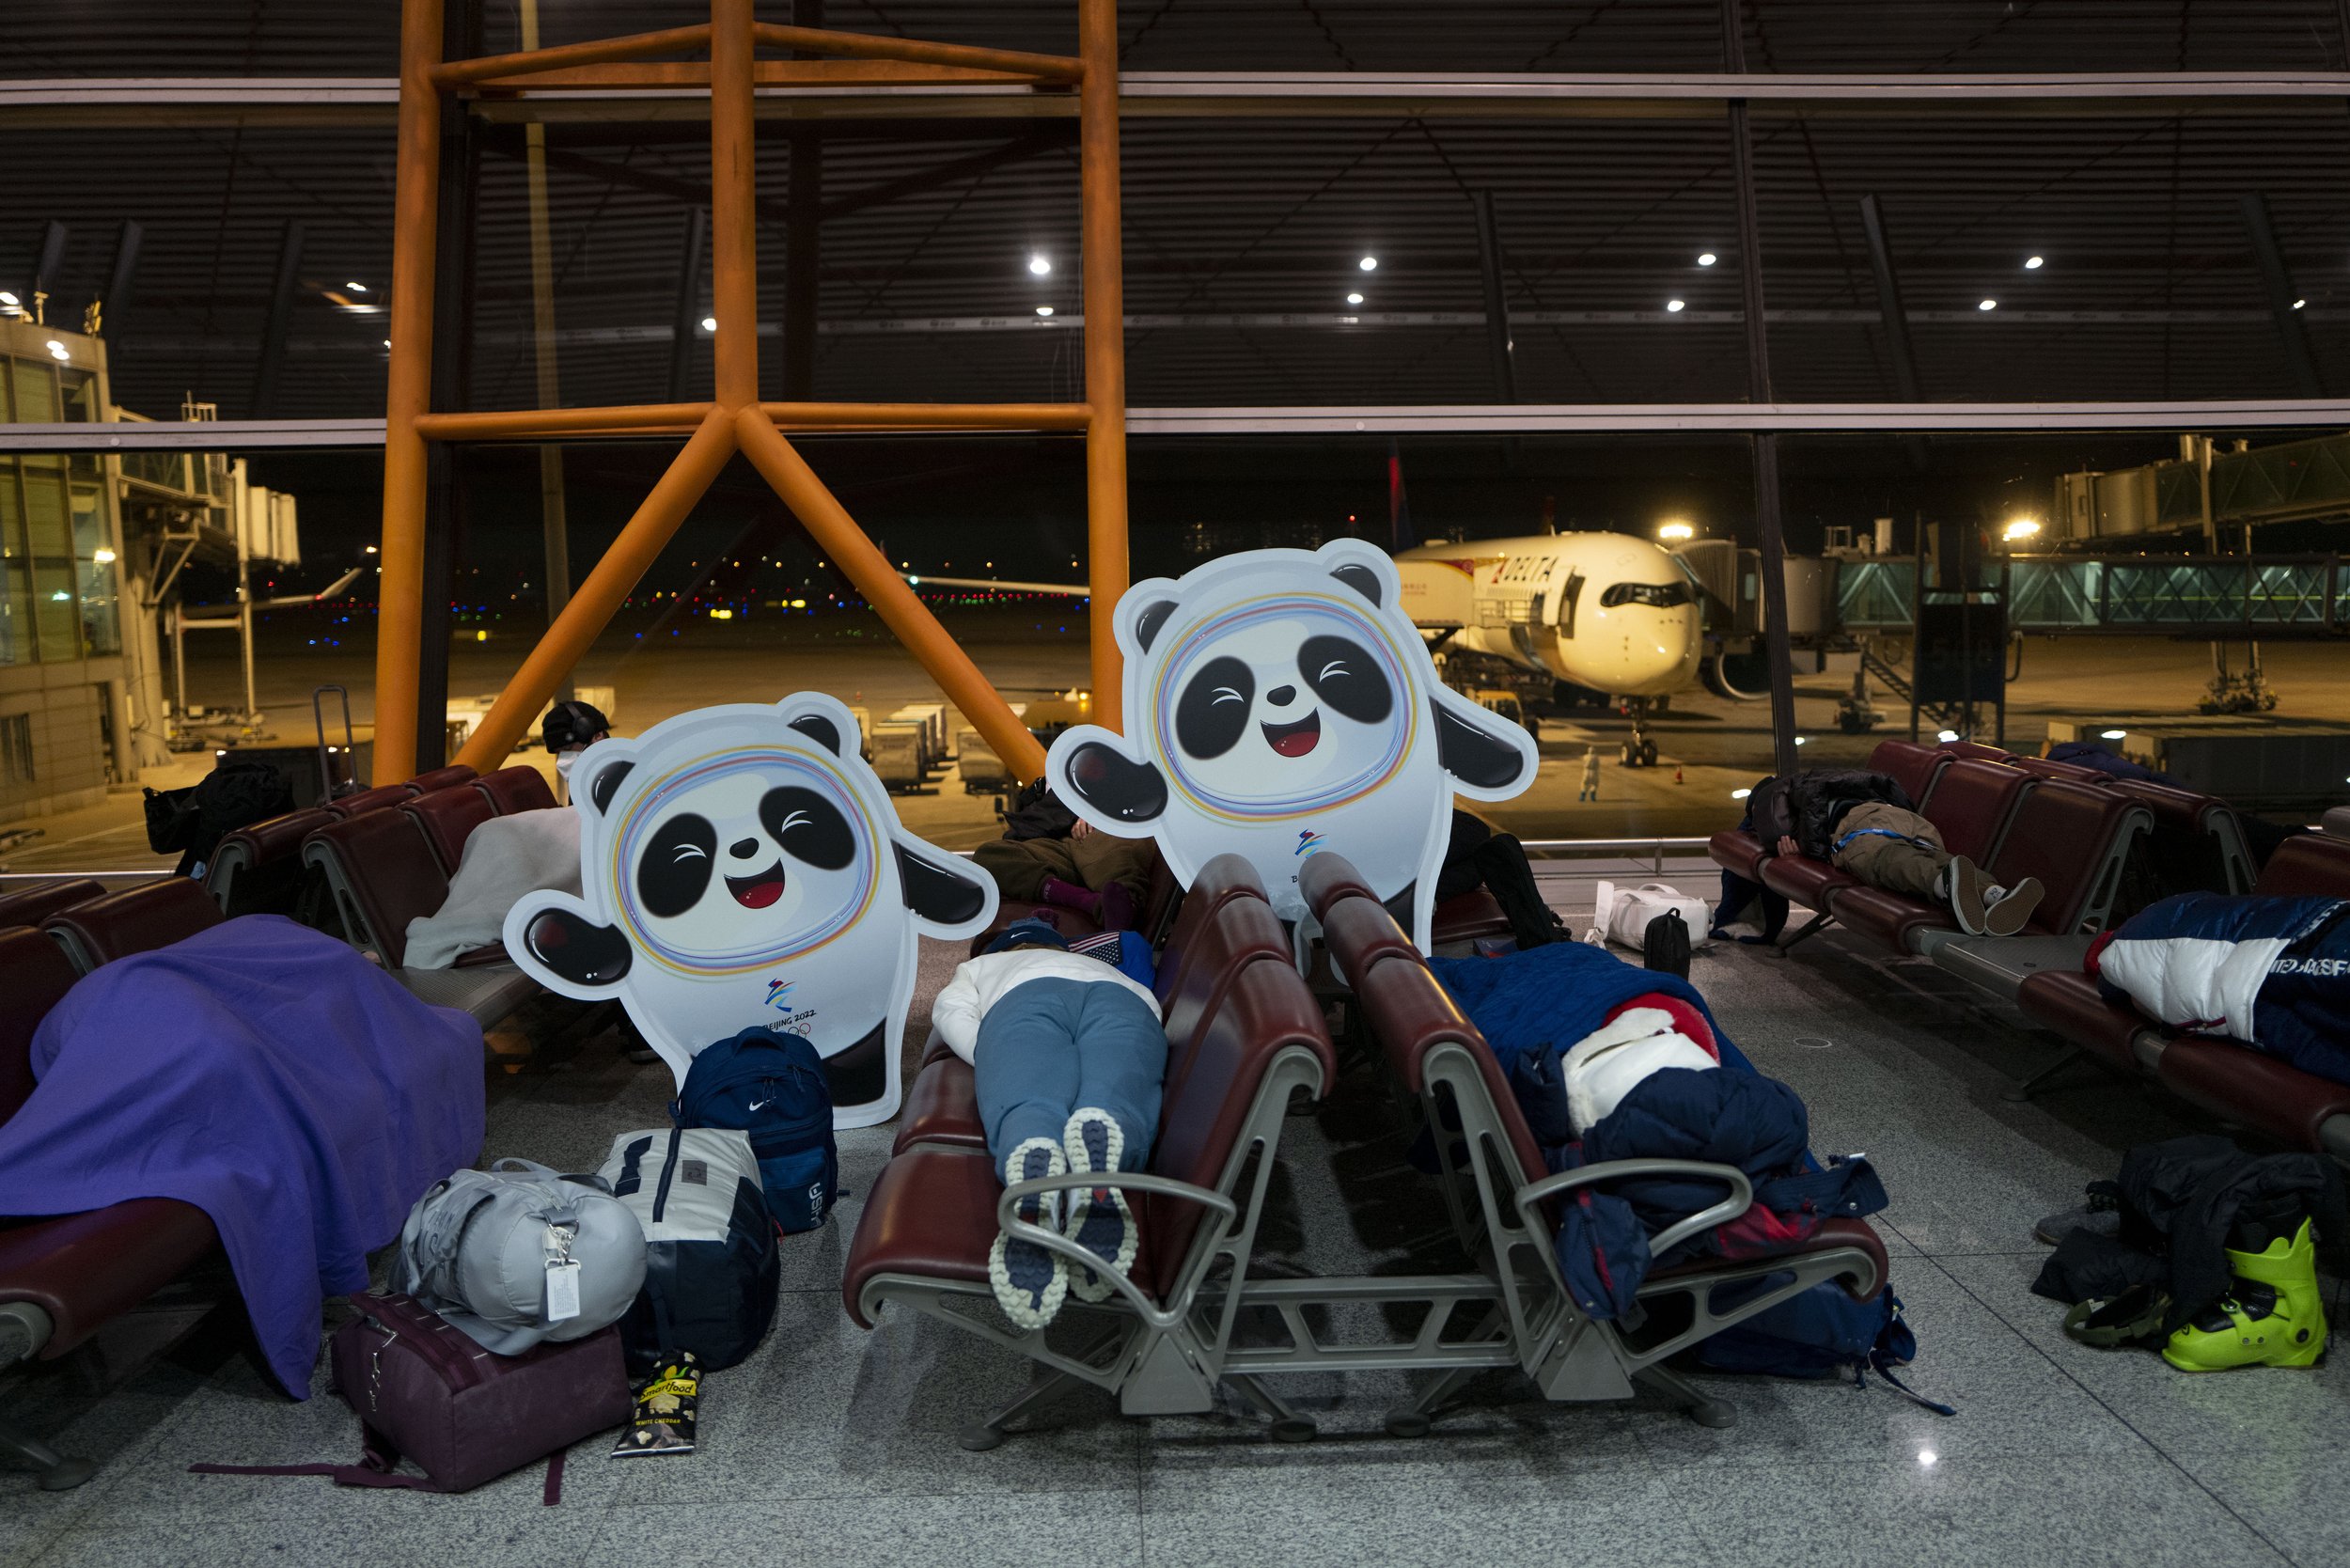  People sleep on benches next to cutouts of the Olympic mascot Bing Dwen Dwen at the Beijing Capital International Airport after the 2022 Winter Olympics, Monday, Feb. 21, 2022, in Beijing. (AP Photo/Jae C. Hong) 